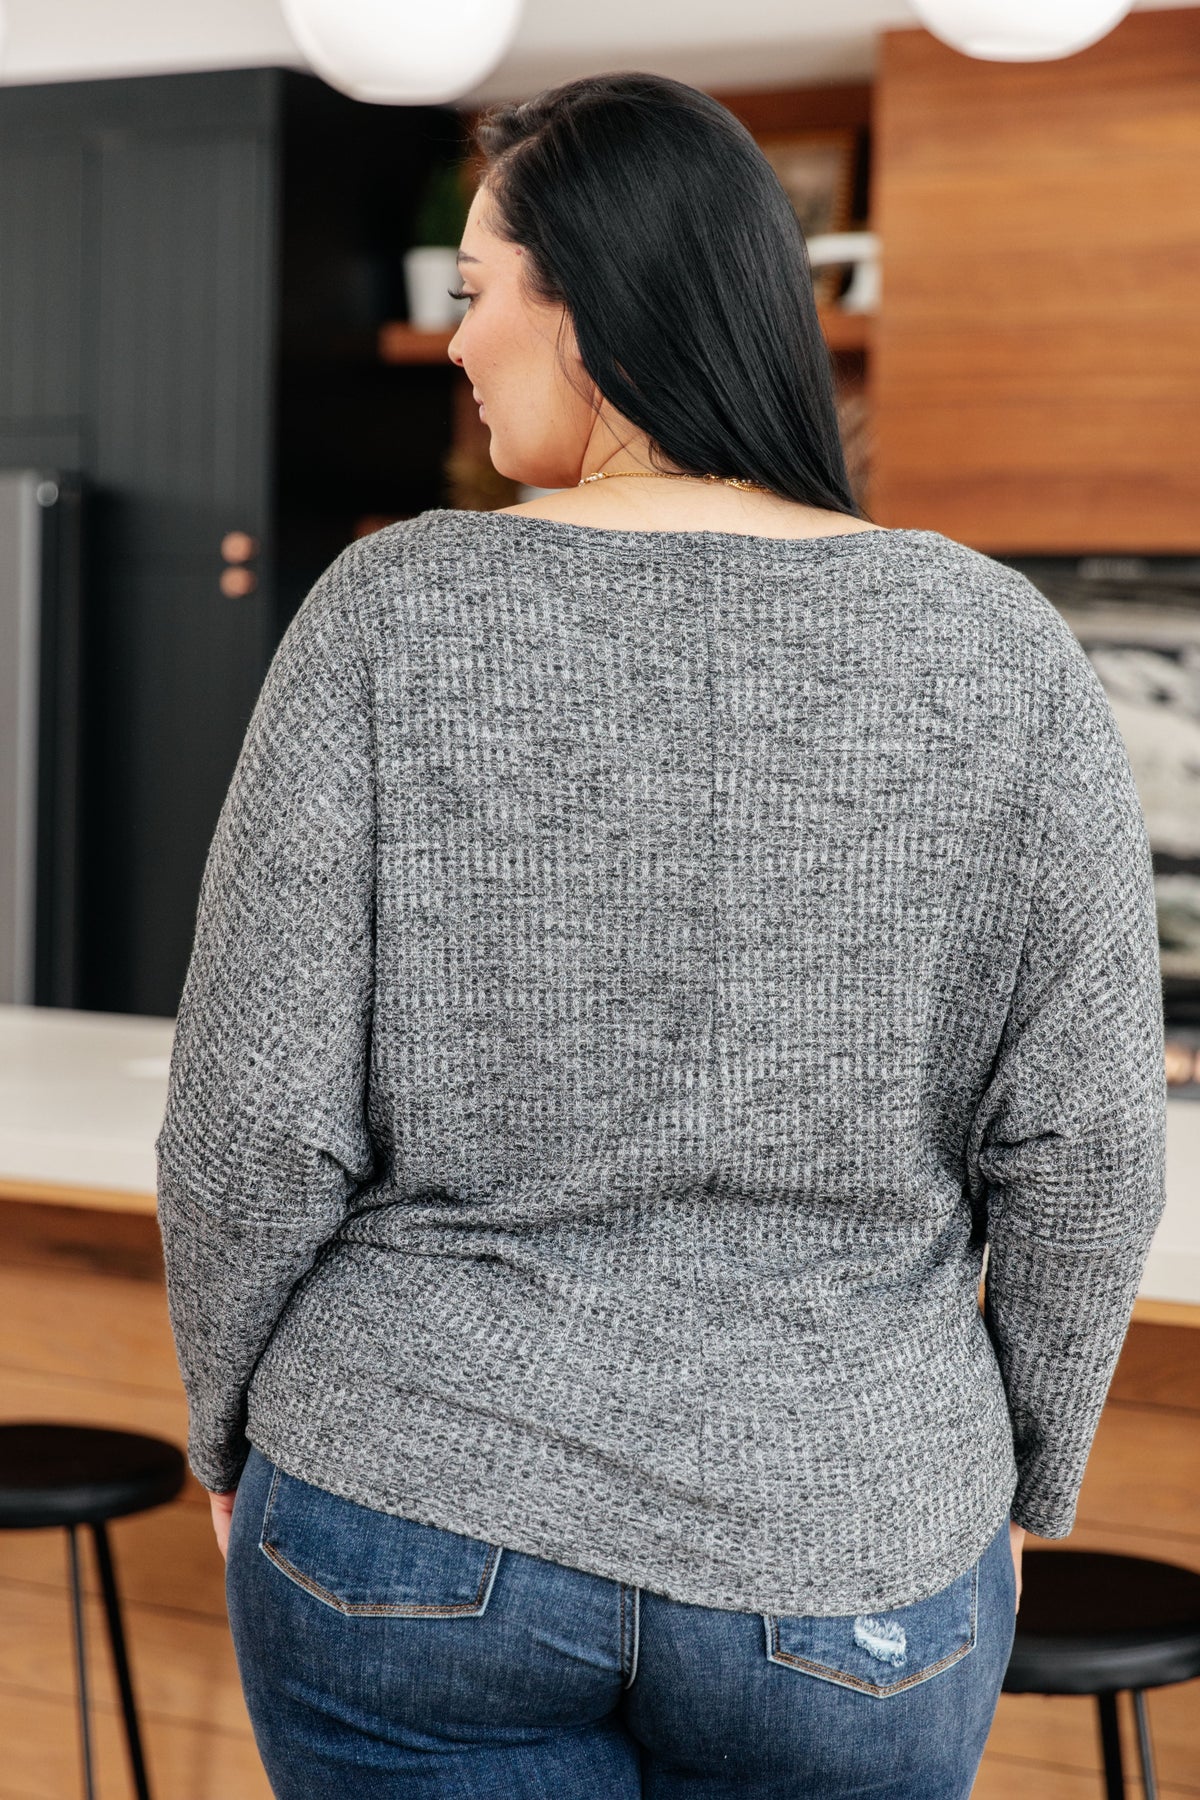 White Birch Warm Thoughts Ribbed Top in Charcoal